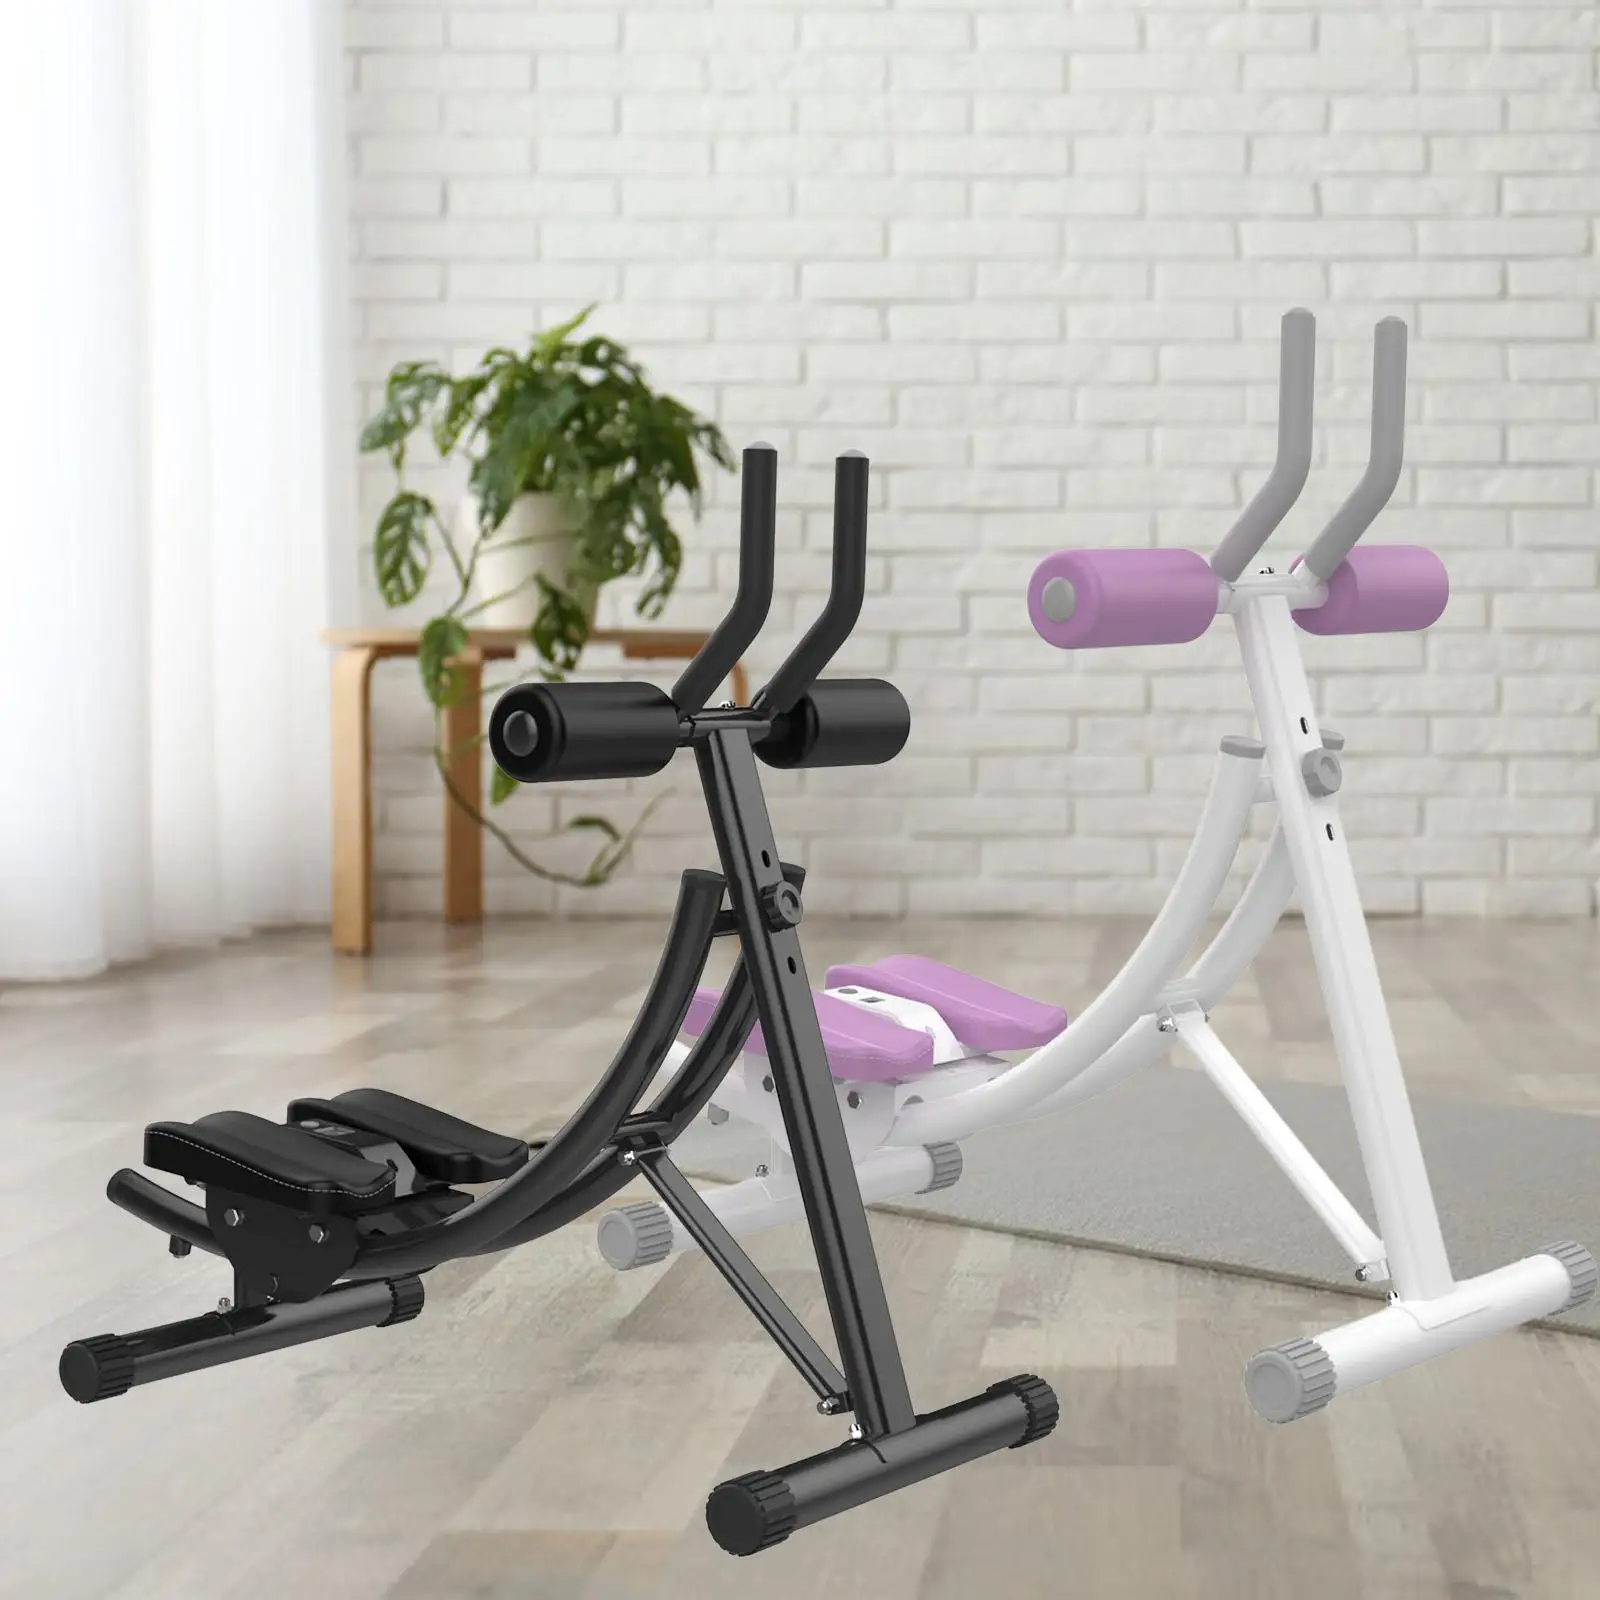 Portable ABS Trainer with LED Display Household Waist Fitness Equipment Abdominal Rolling Machine Core Abdominal Trainers